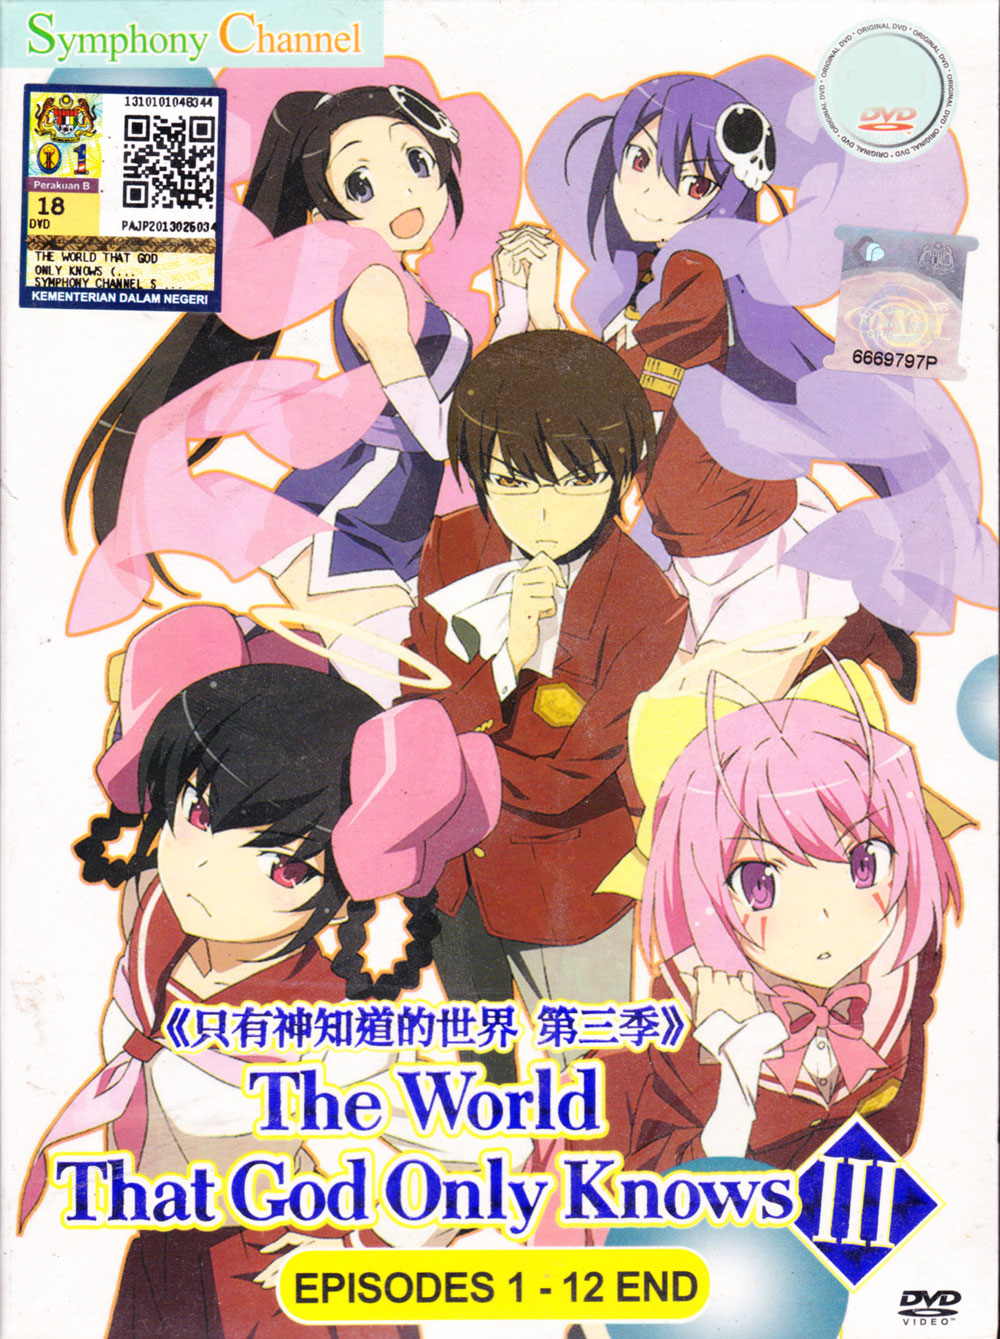 The World God Only Knows Season 3 image 2